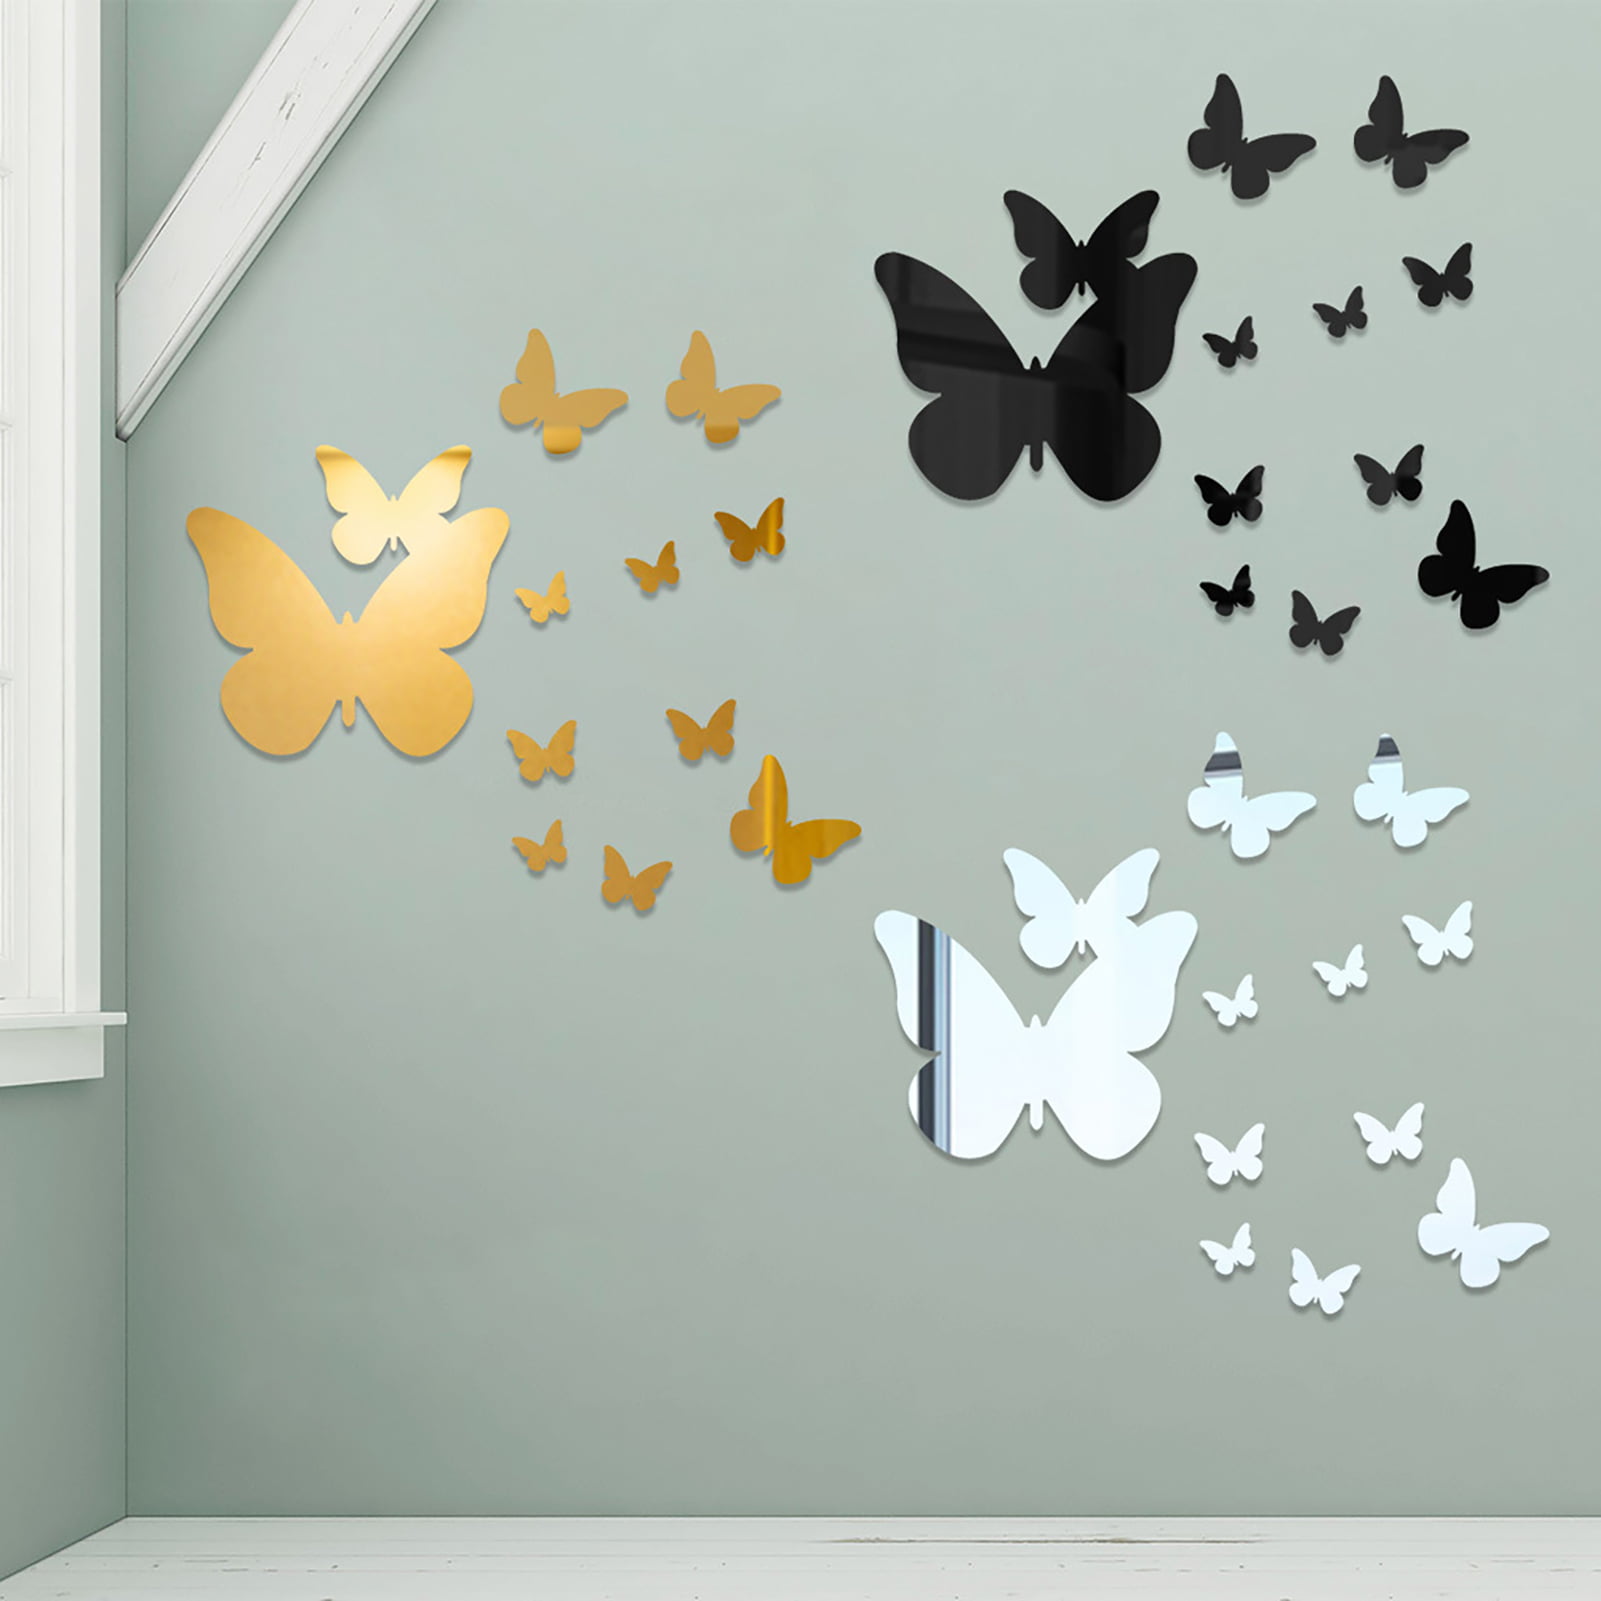 Details about   Butterfly Wall Sticker Decal Vinyl Art Mural Home Decor Removable 